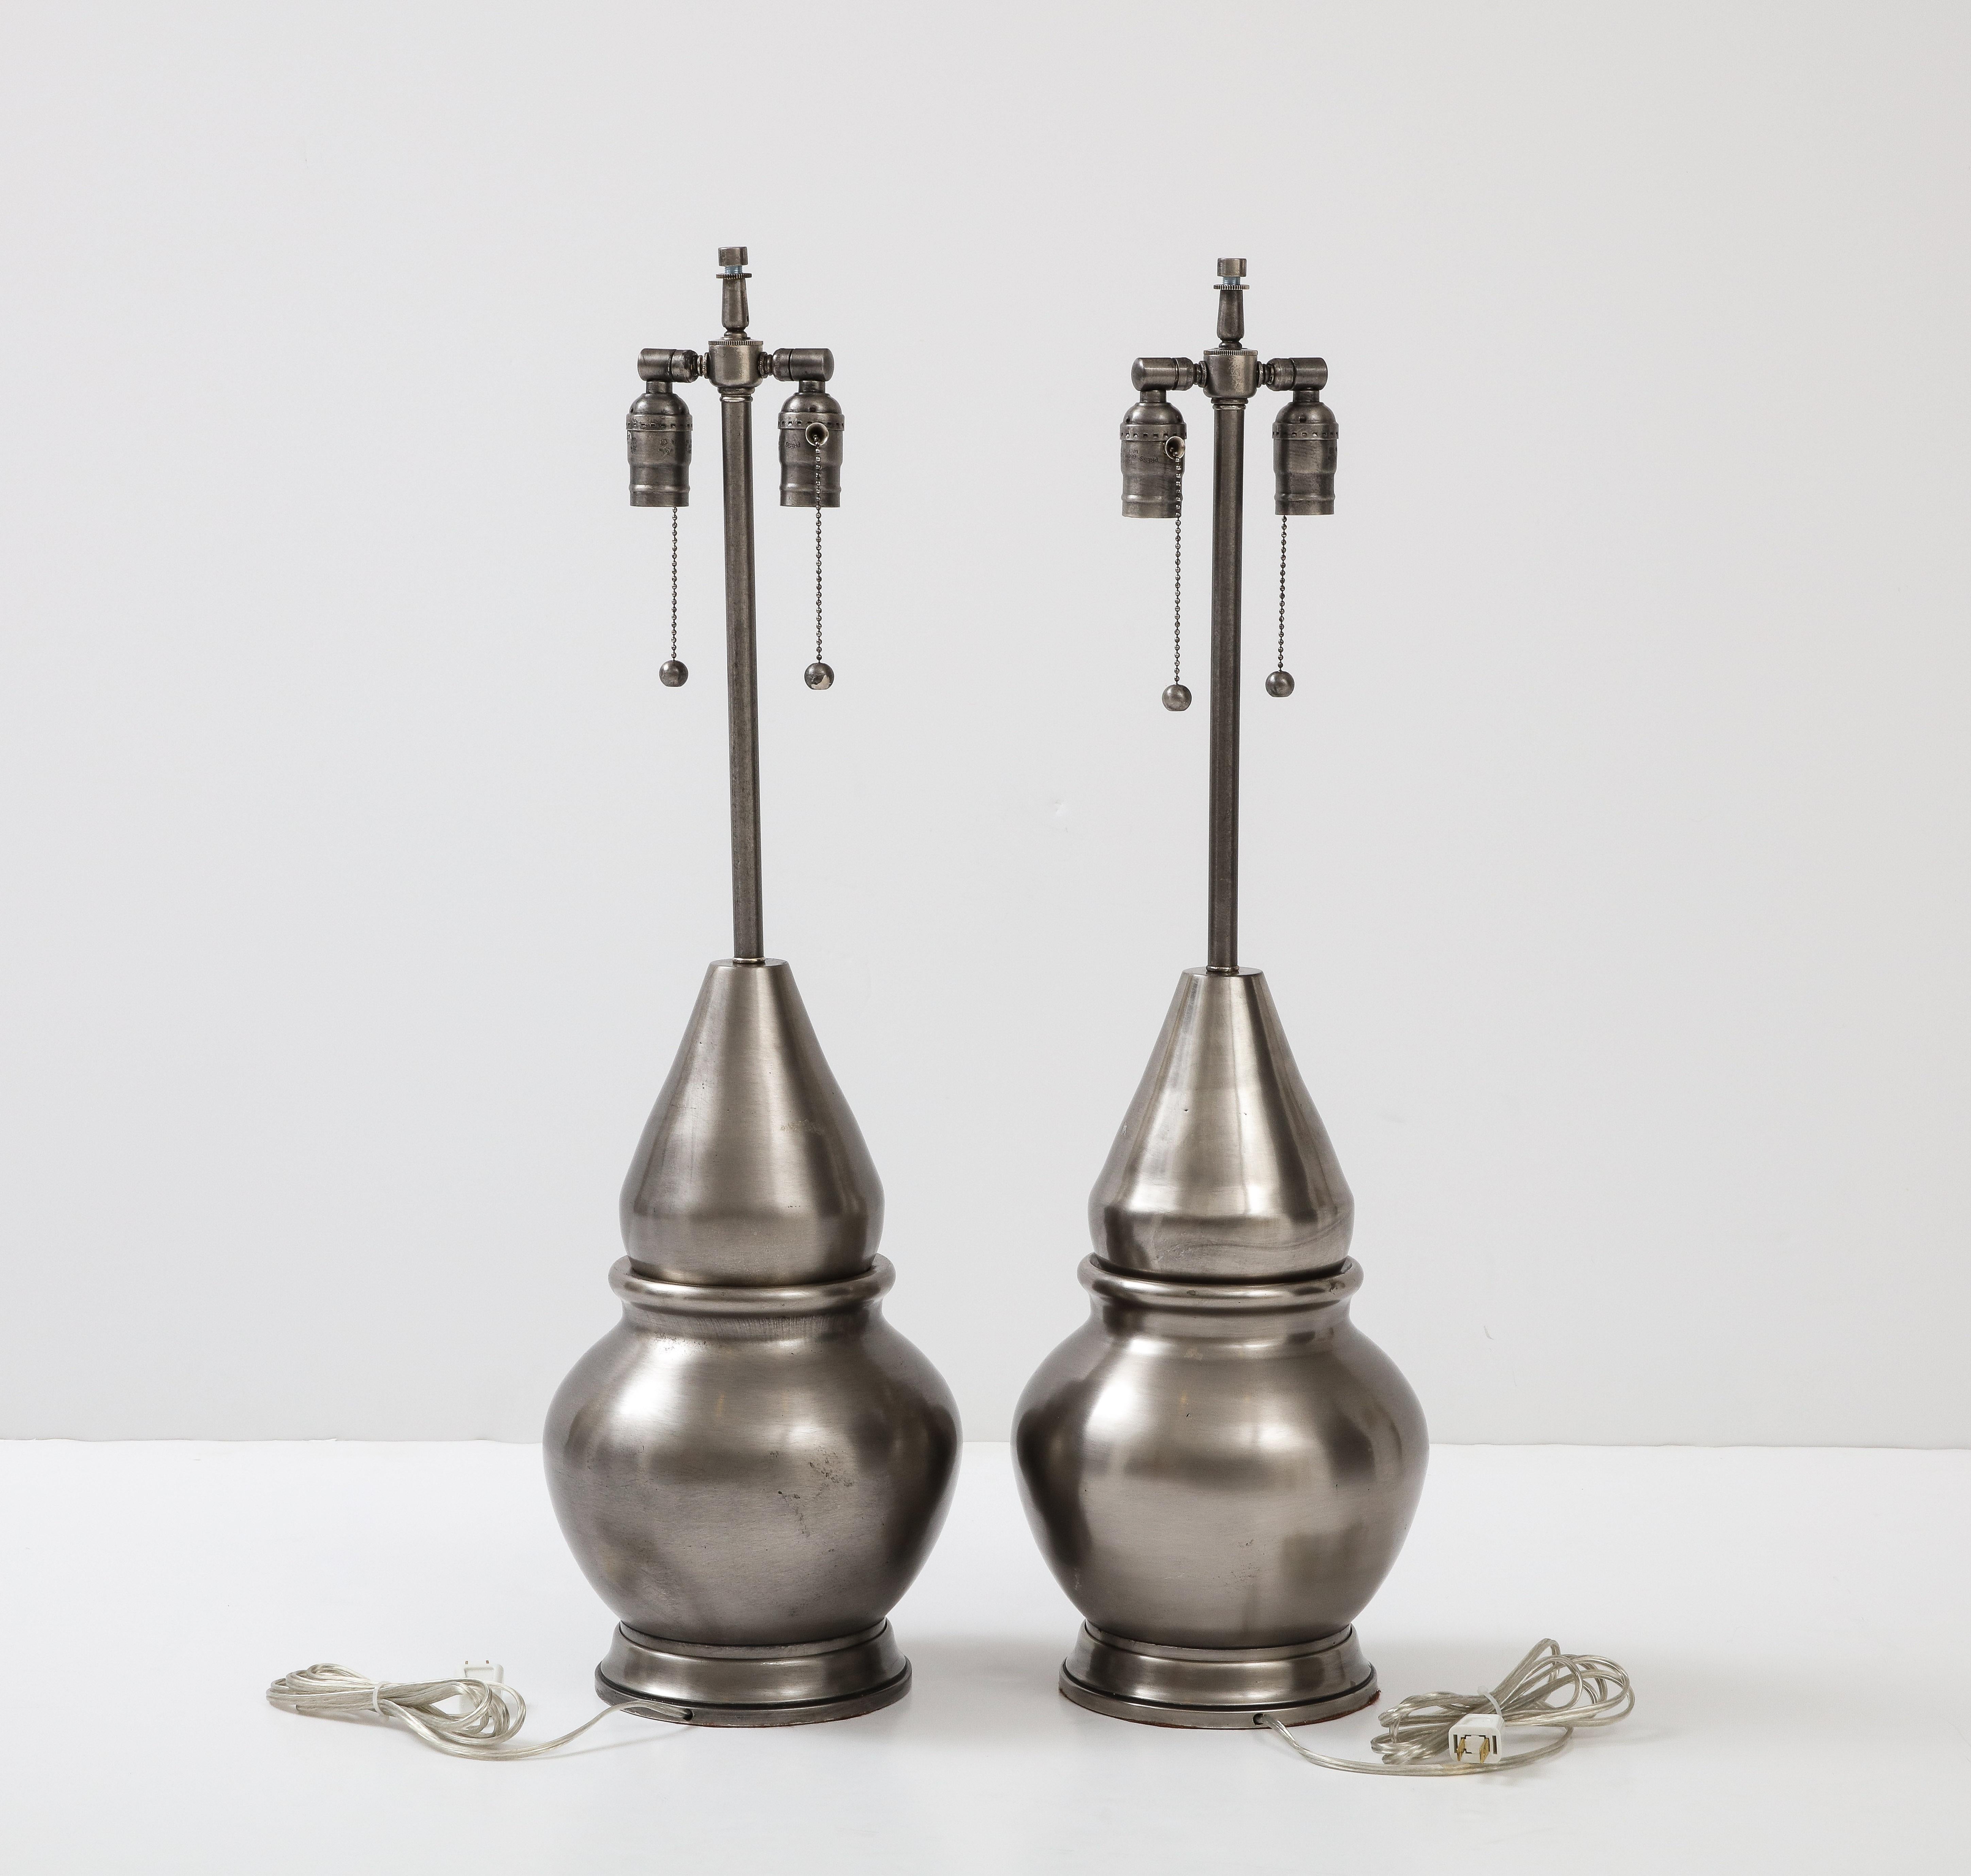 Modernist pair of custom hand turned gun metal lamps featuring a moorish/turret design. Lamps have a seductive Tahitian black pearl color. Rewired for use in the USA with double pull chain sockets. 100W max bulbs.